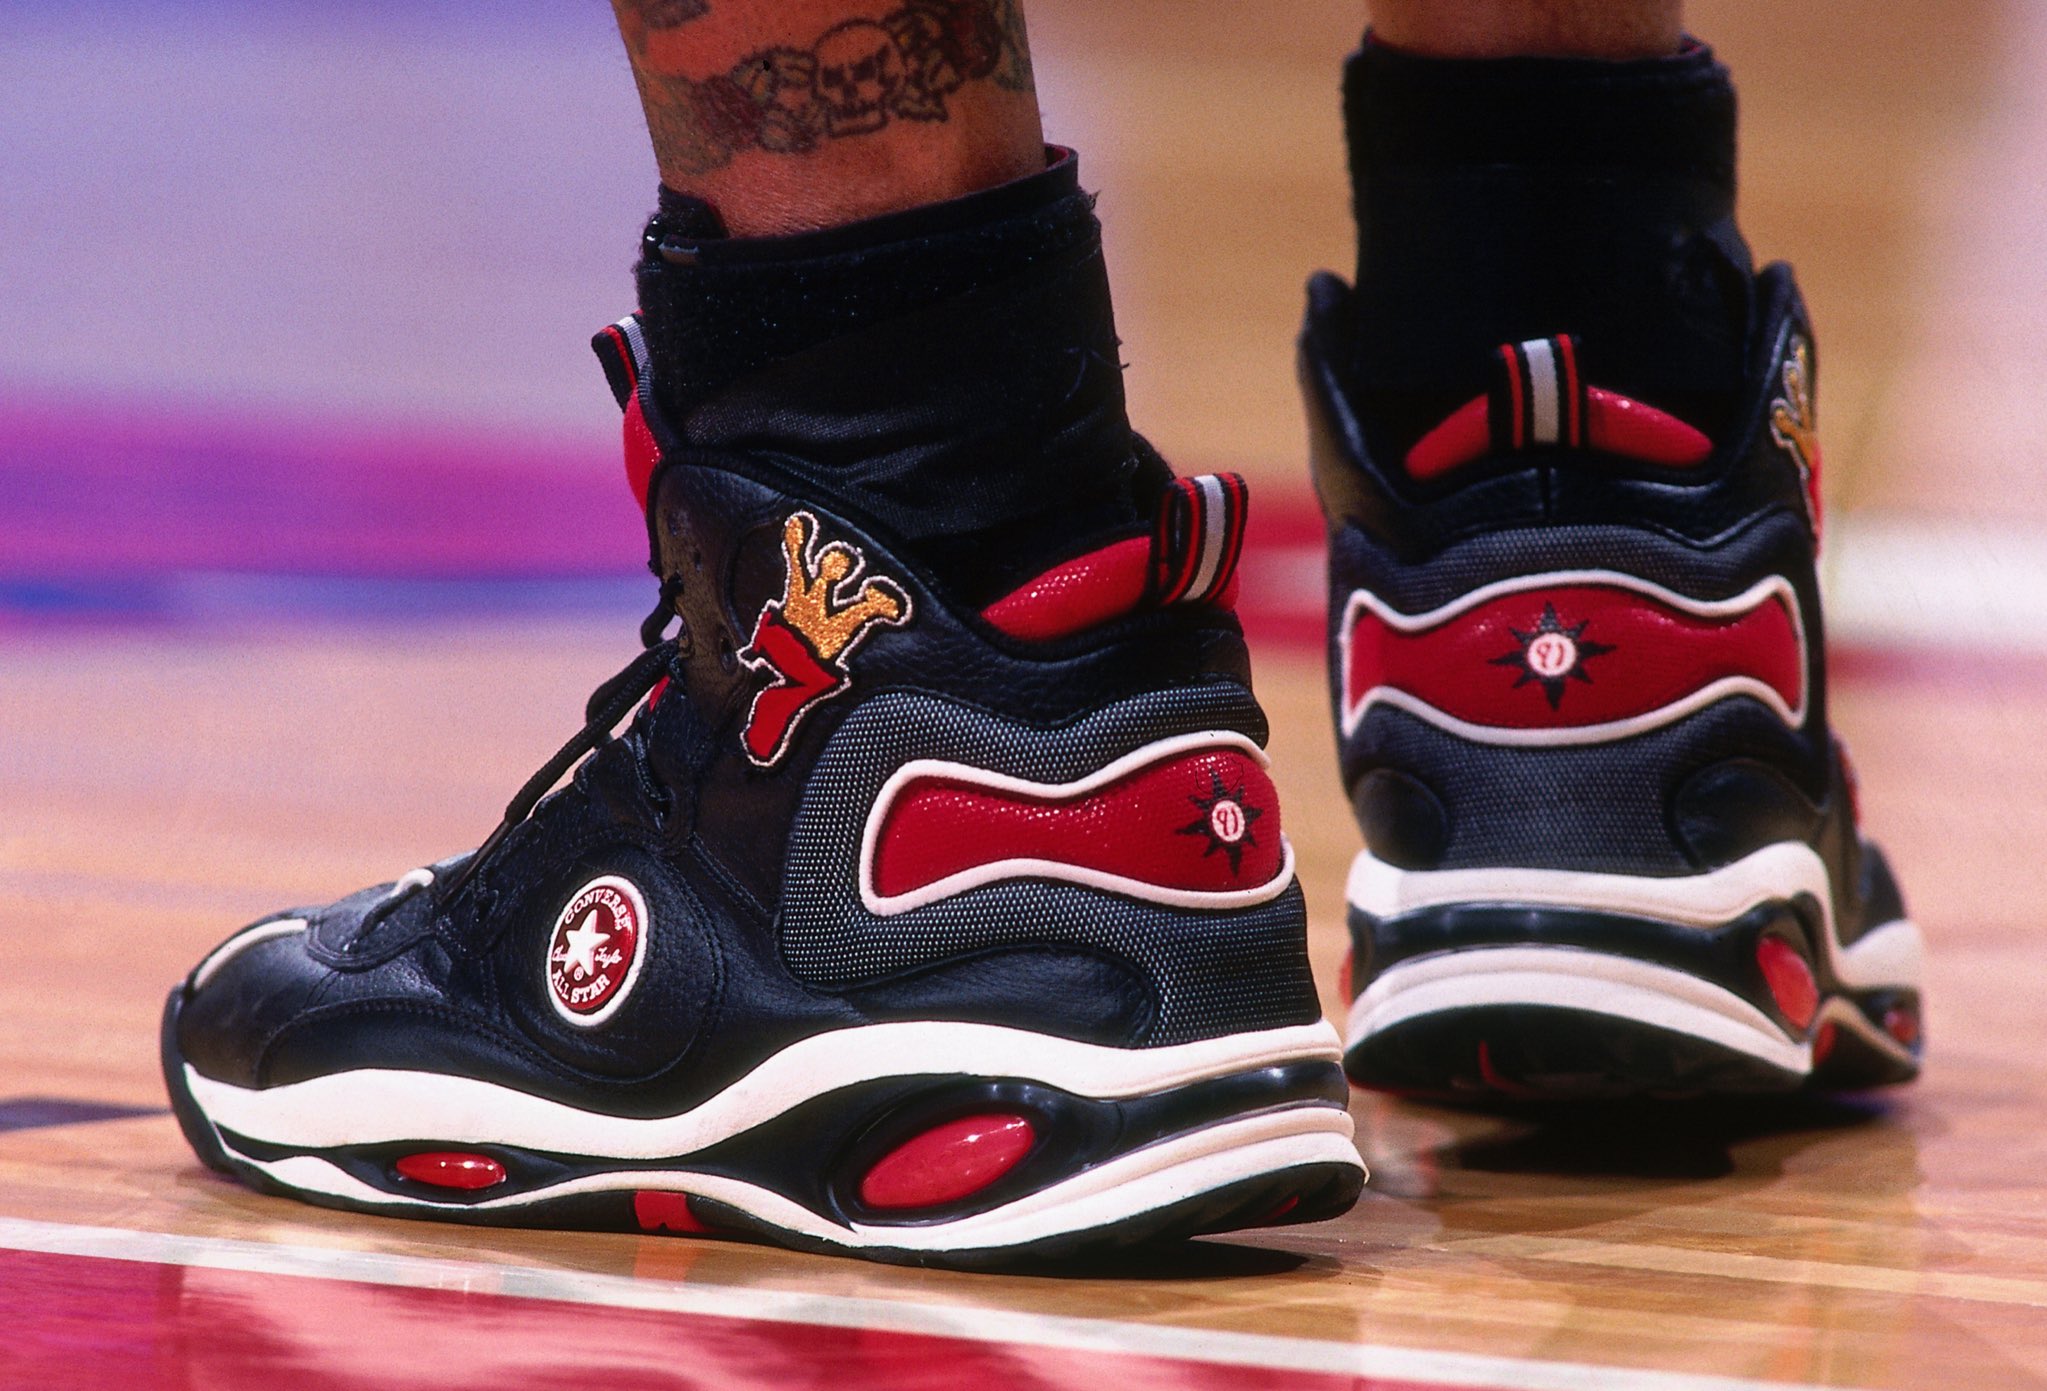 Brutal Asistir Tren Nick DePaula on Twitter: "During the 98 Playoffs, @DennisRodman debuted the Converse  D-Rod. The brand added a slot machine-esque lucky 7 on his pairs. A subtle  nod to his love for Las